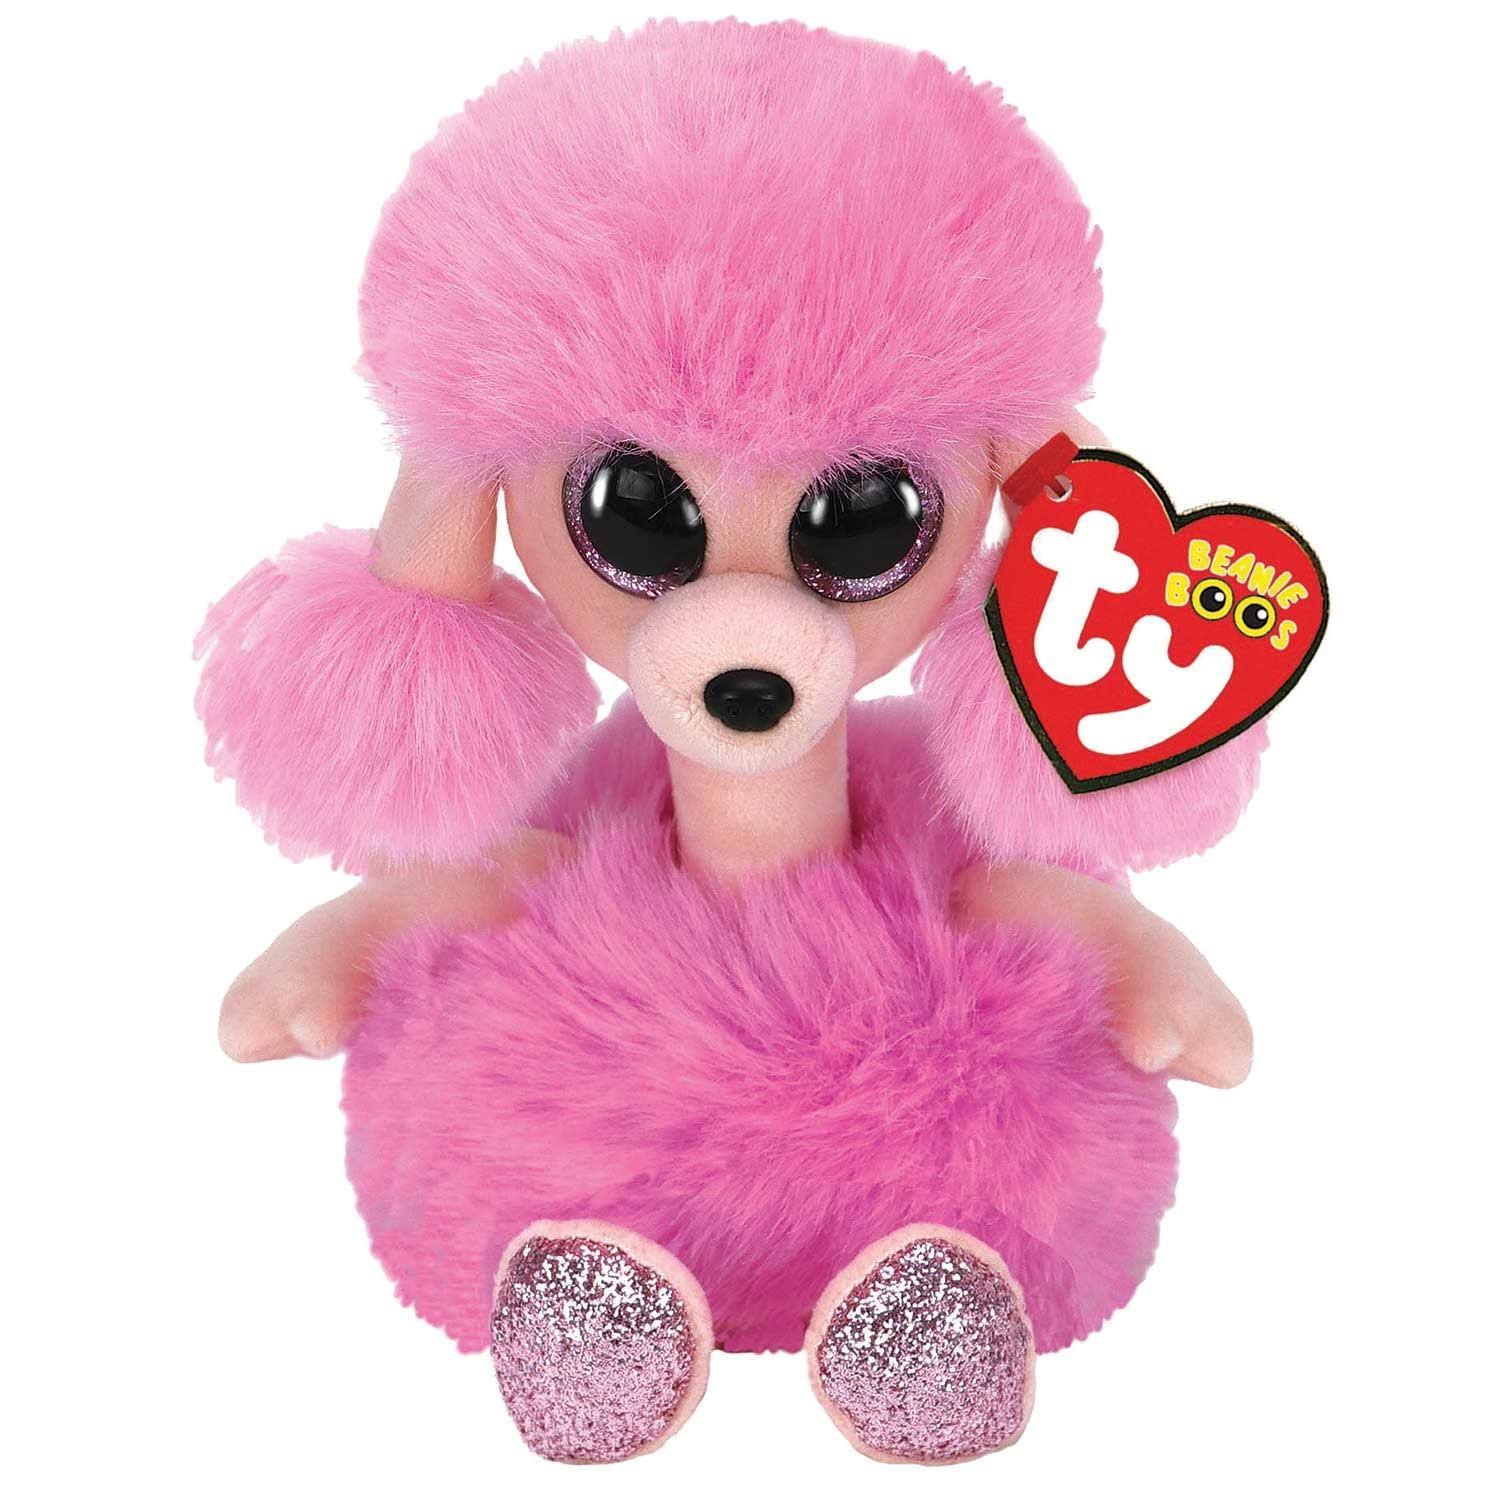 Ty Beanie Boo - Camilla Poodle